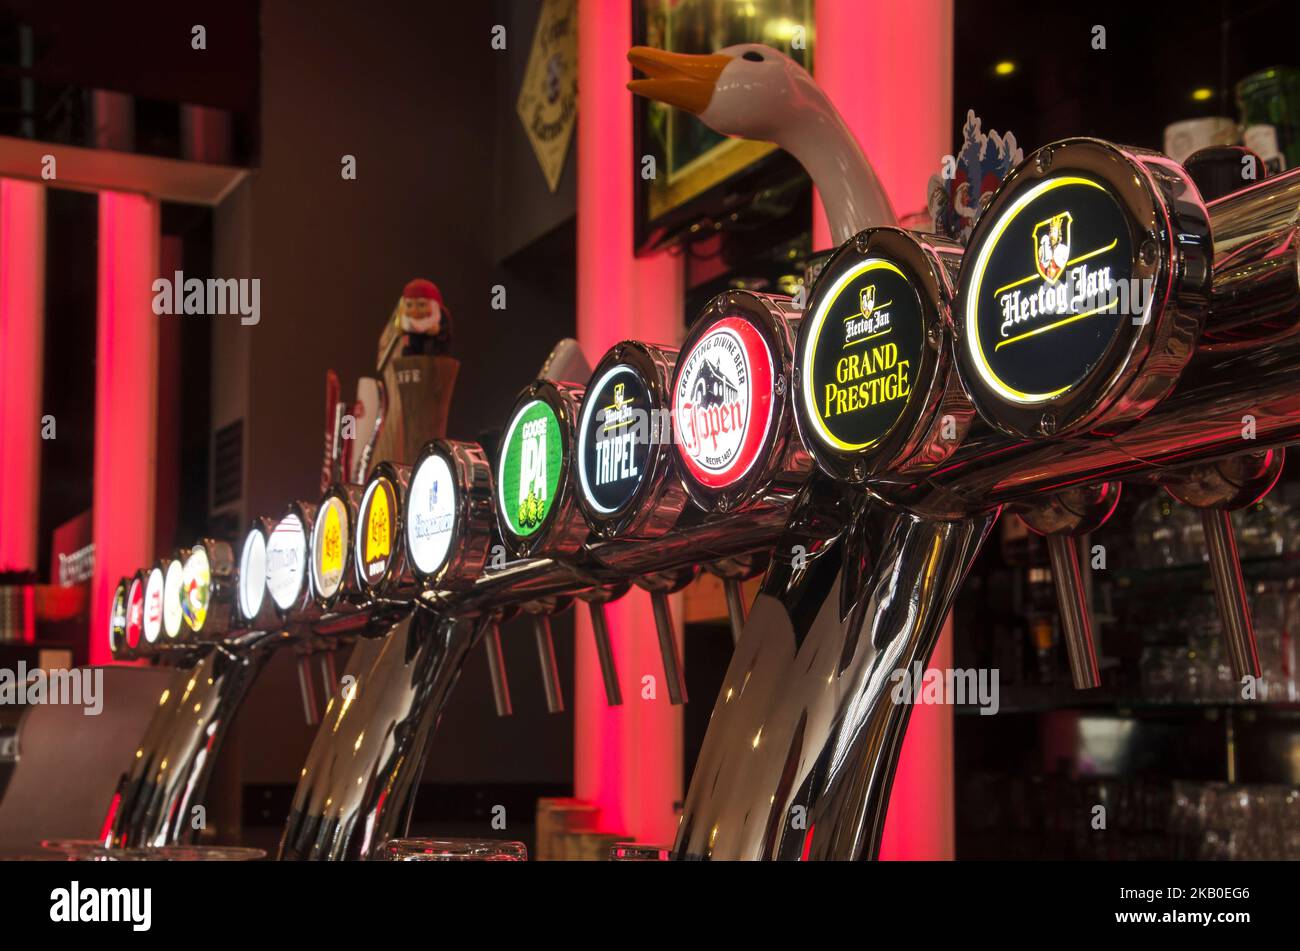 Bergen op Zoom, The Netherlands, December 29, 2019: array of beer pumps in a bar with various Dutch and Belgian craft beers on draught Stock Photo